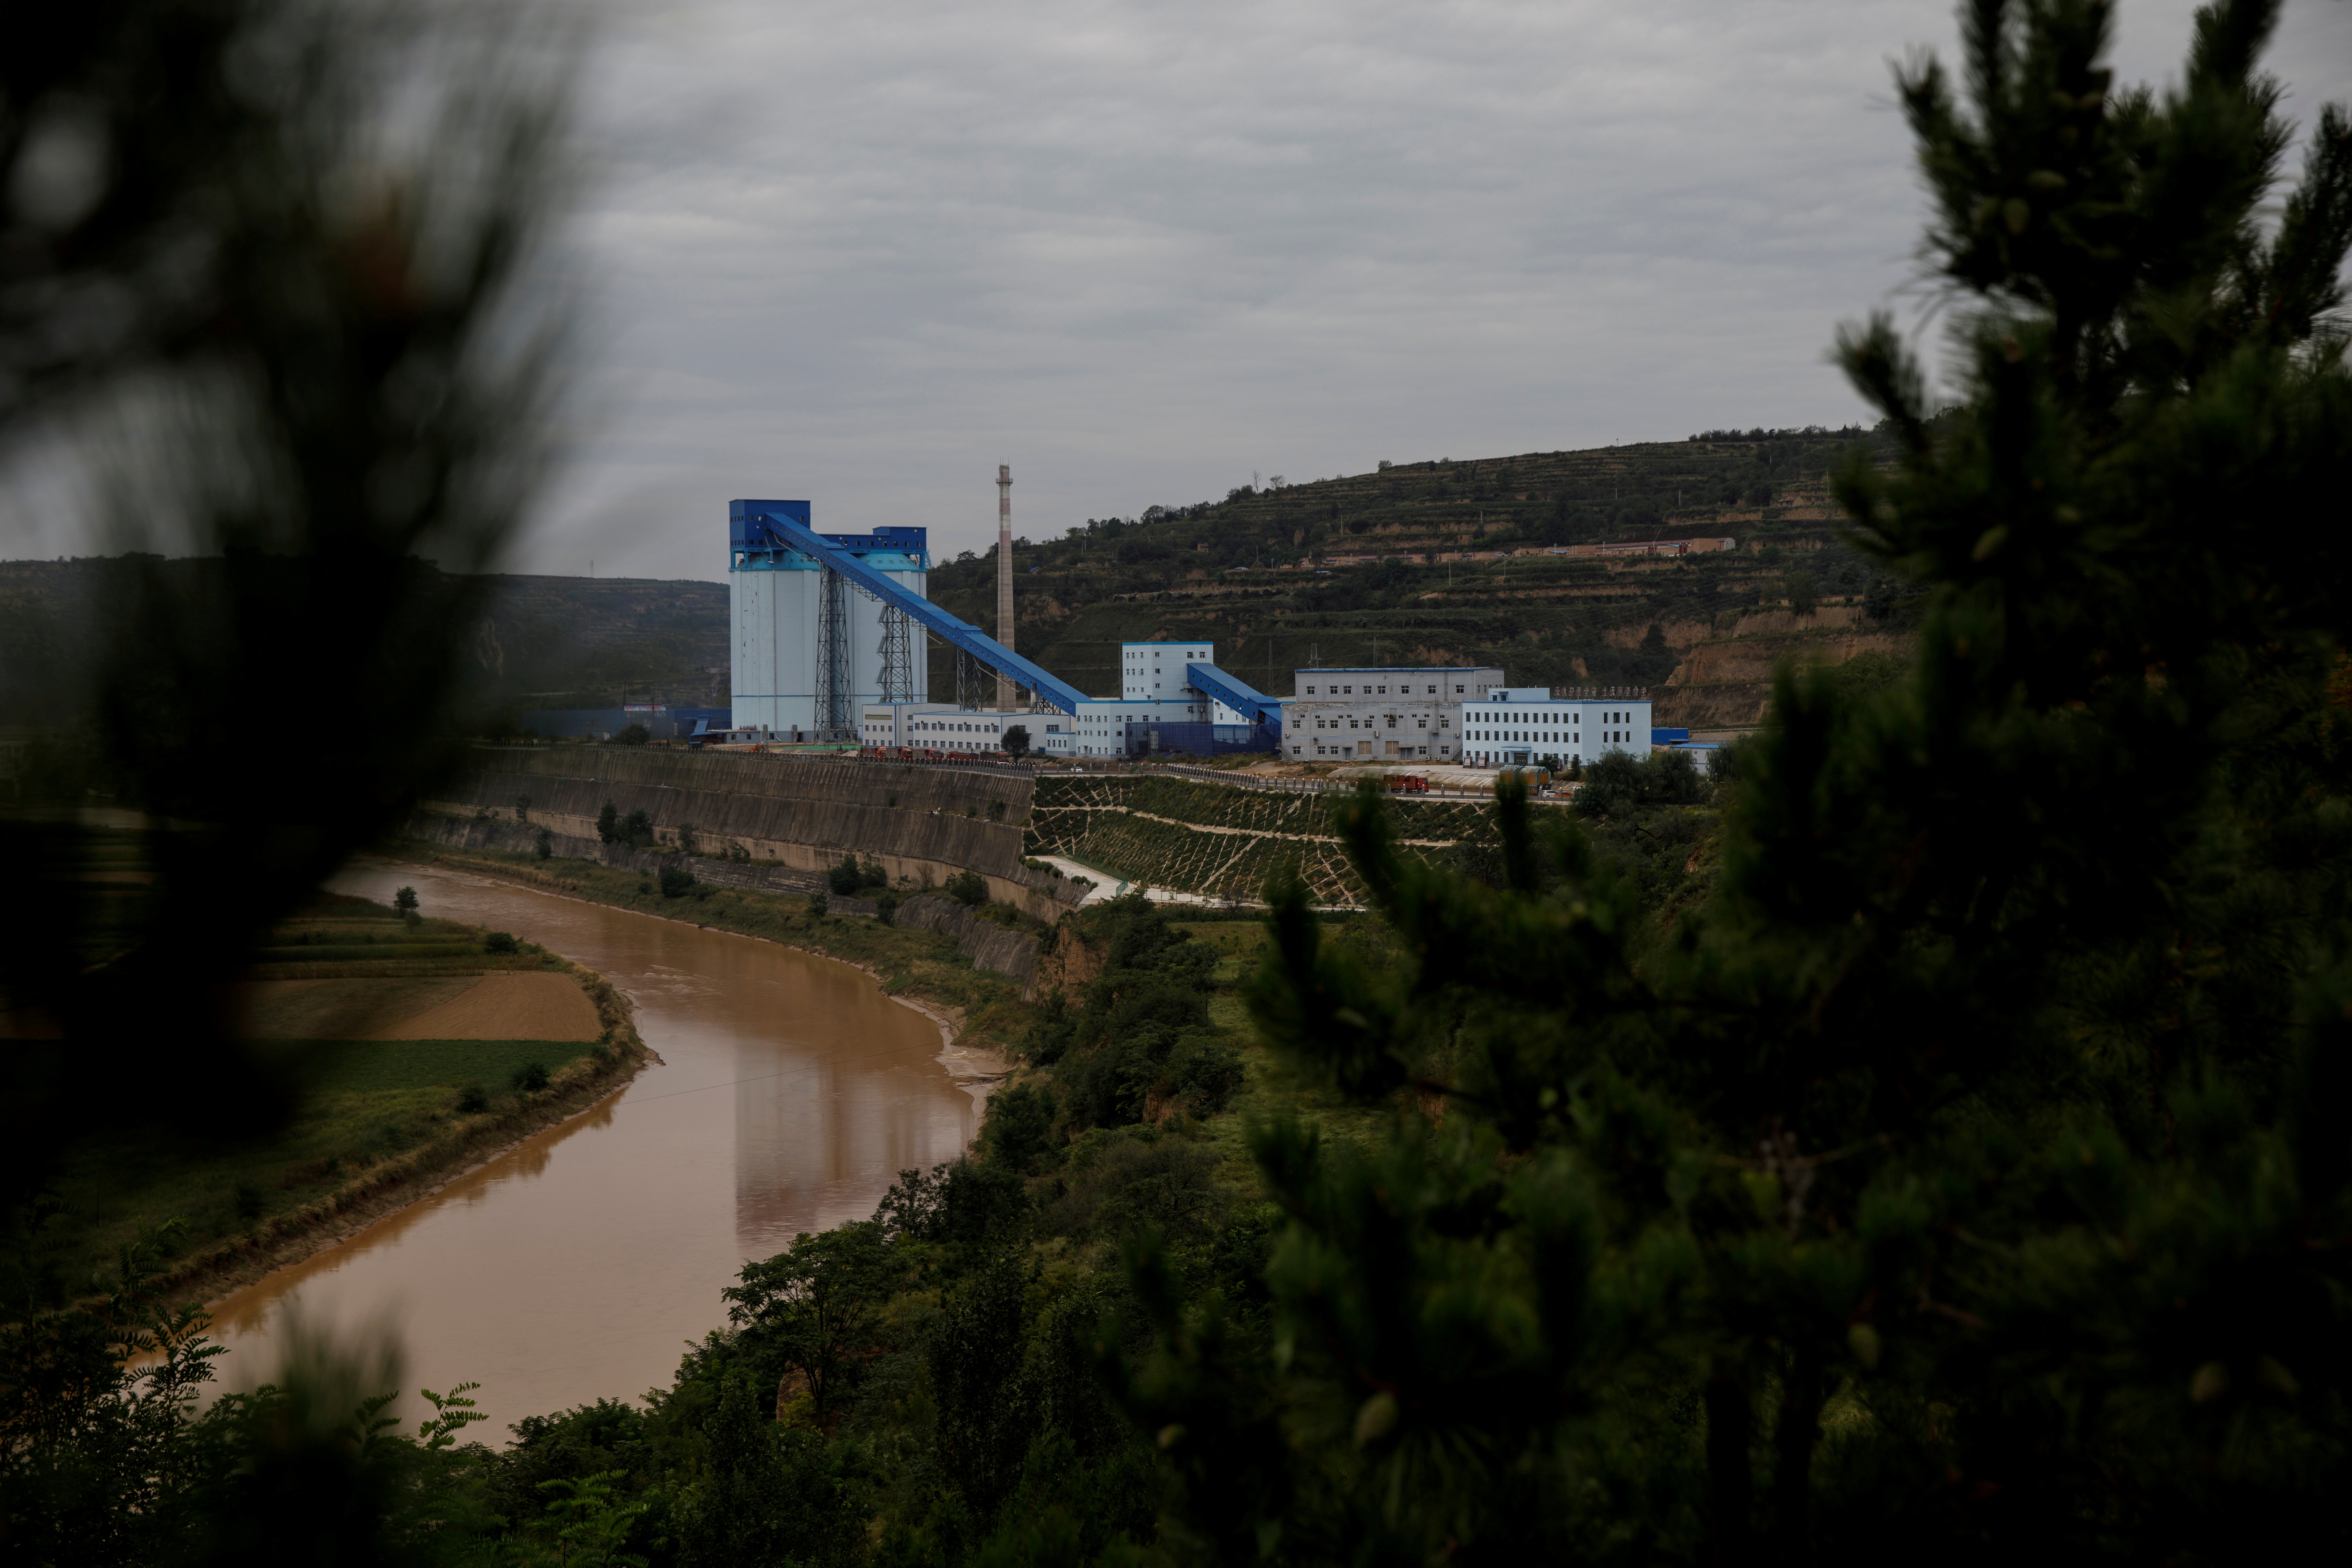 The Walnut Valley coal mine that is part of Huaneng Group's integrated coal power project stands near Qingyang, Ning County, Gansu province, China